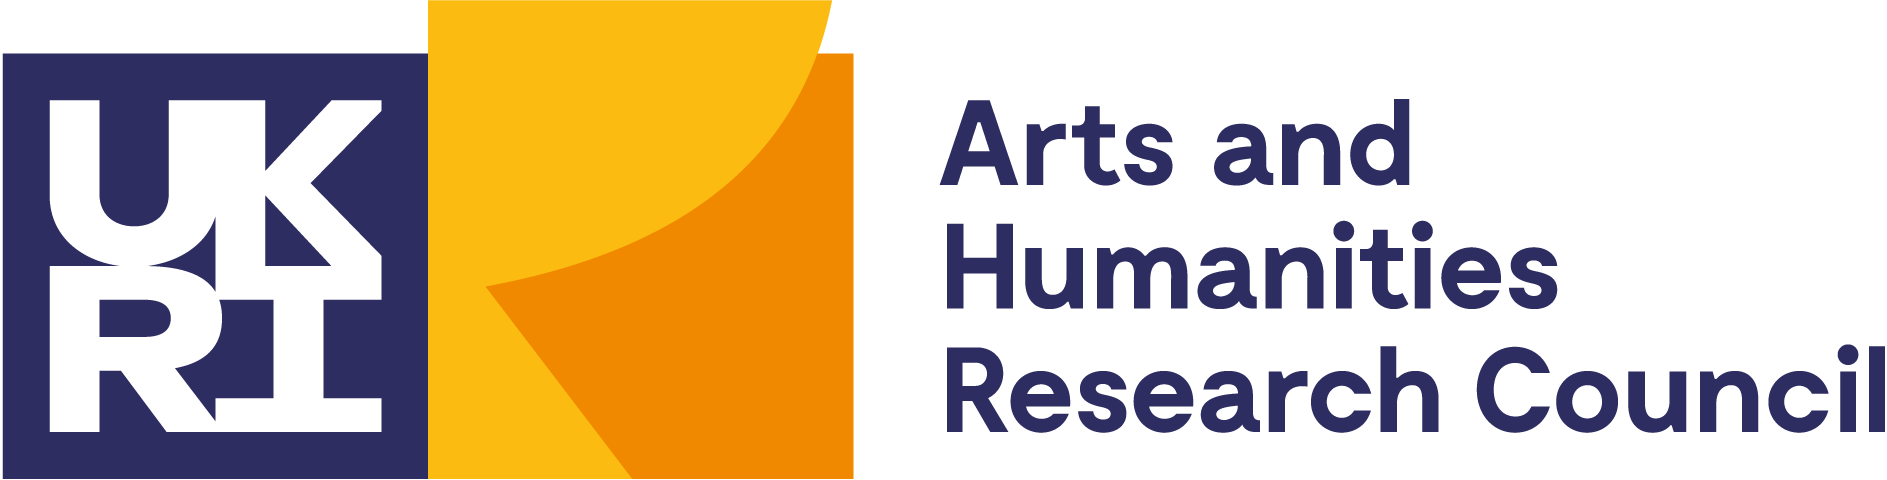 Arts and Humanities Research Council logo in 2021